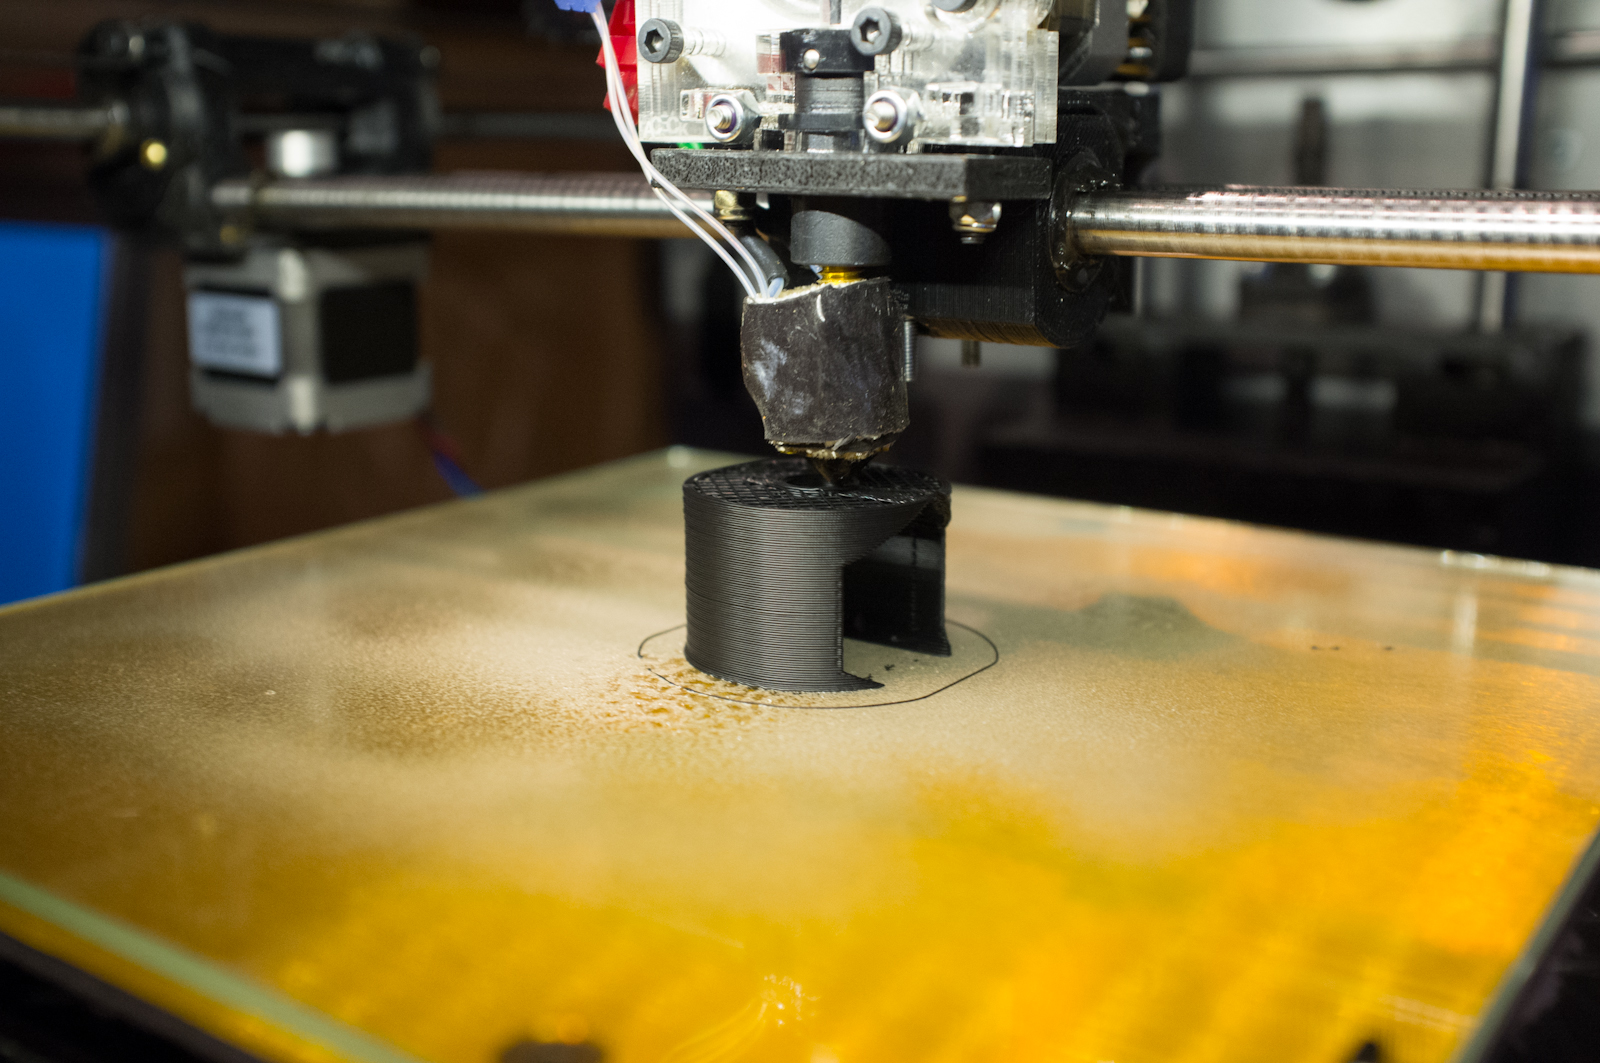 Printing a shower handle holder on a hair spray primed glass plate